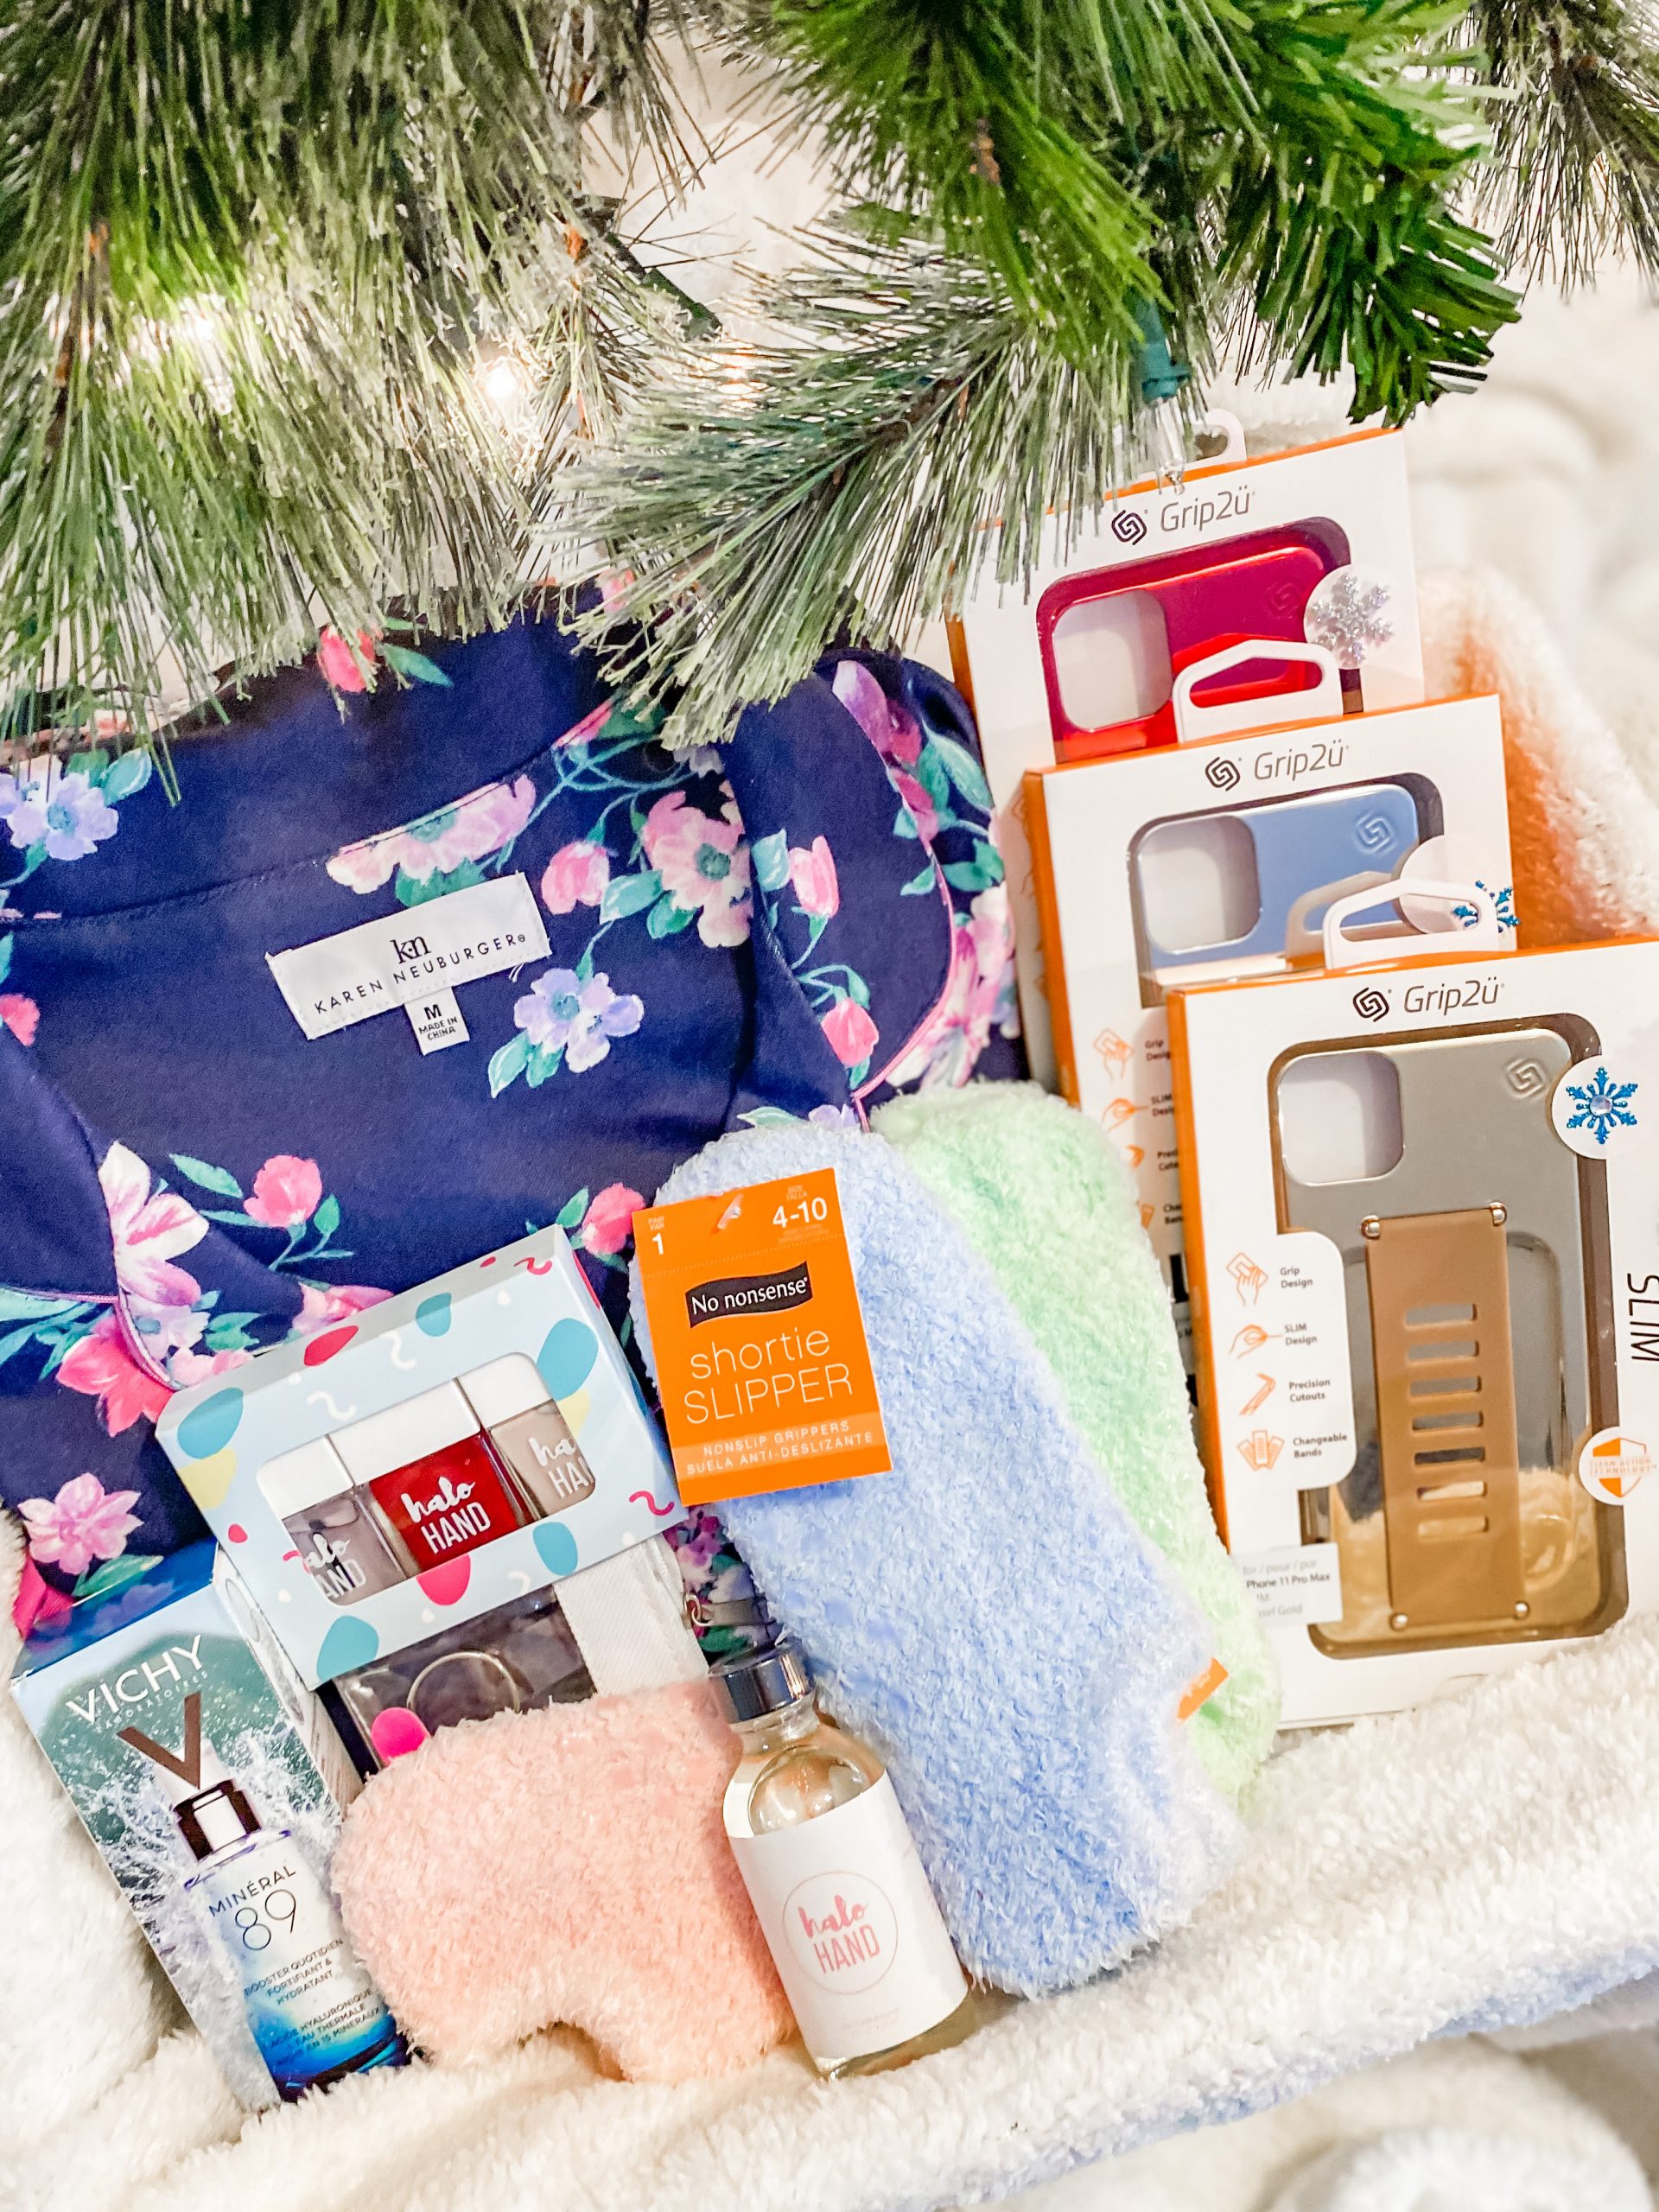 The Best Holiday Gift Ideas for Her This Year!